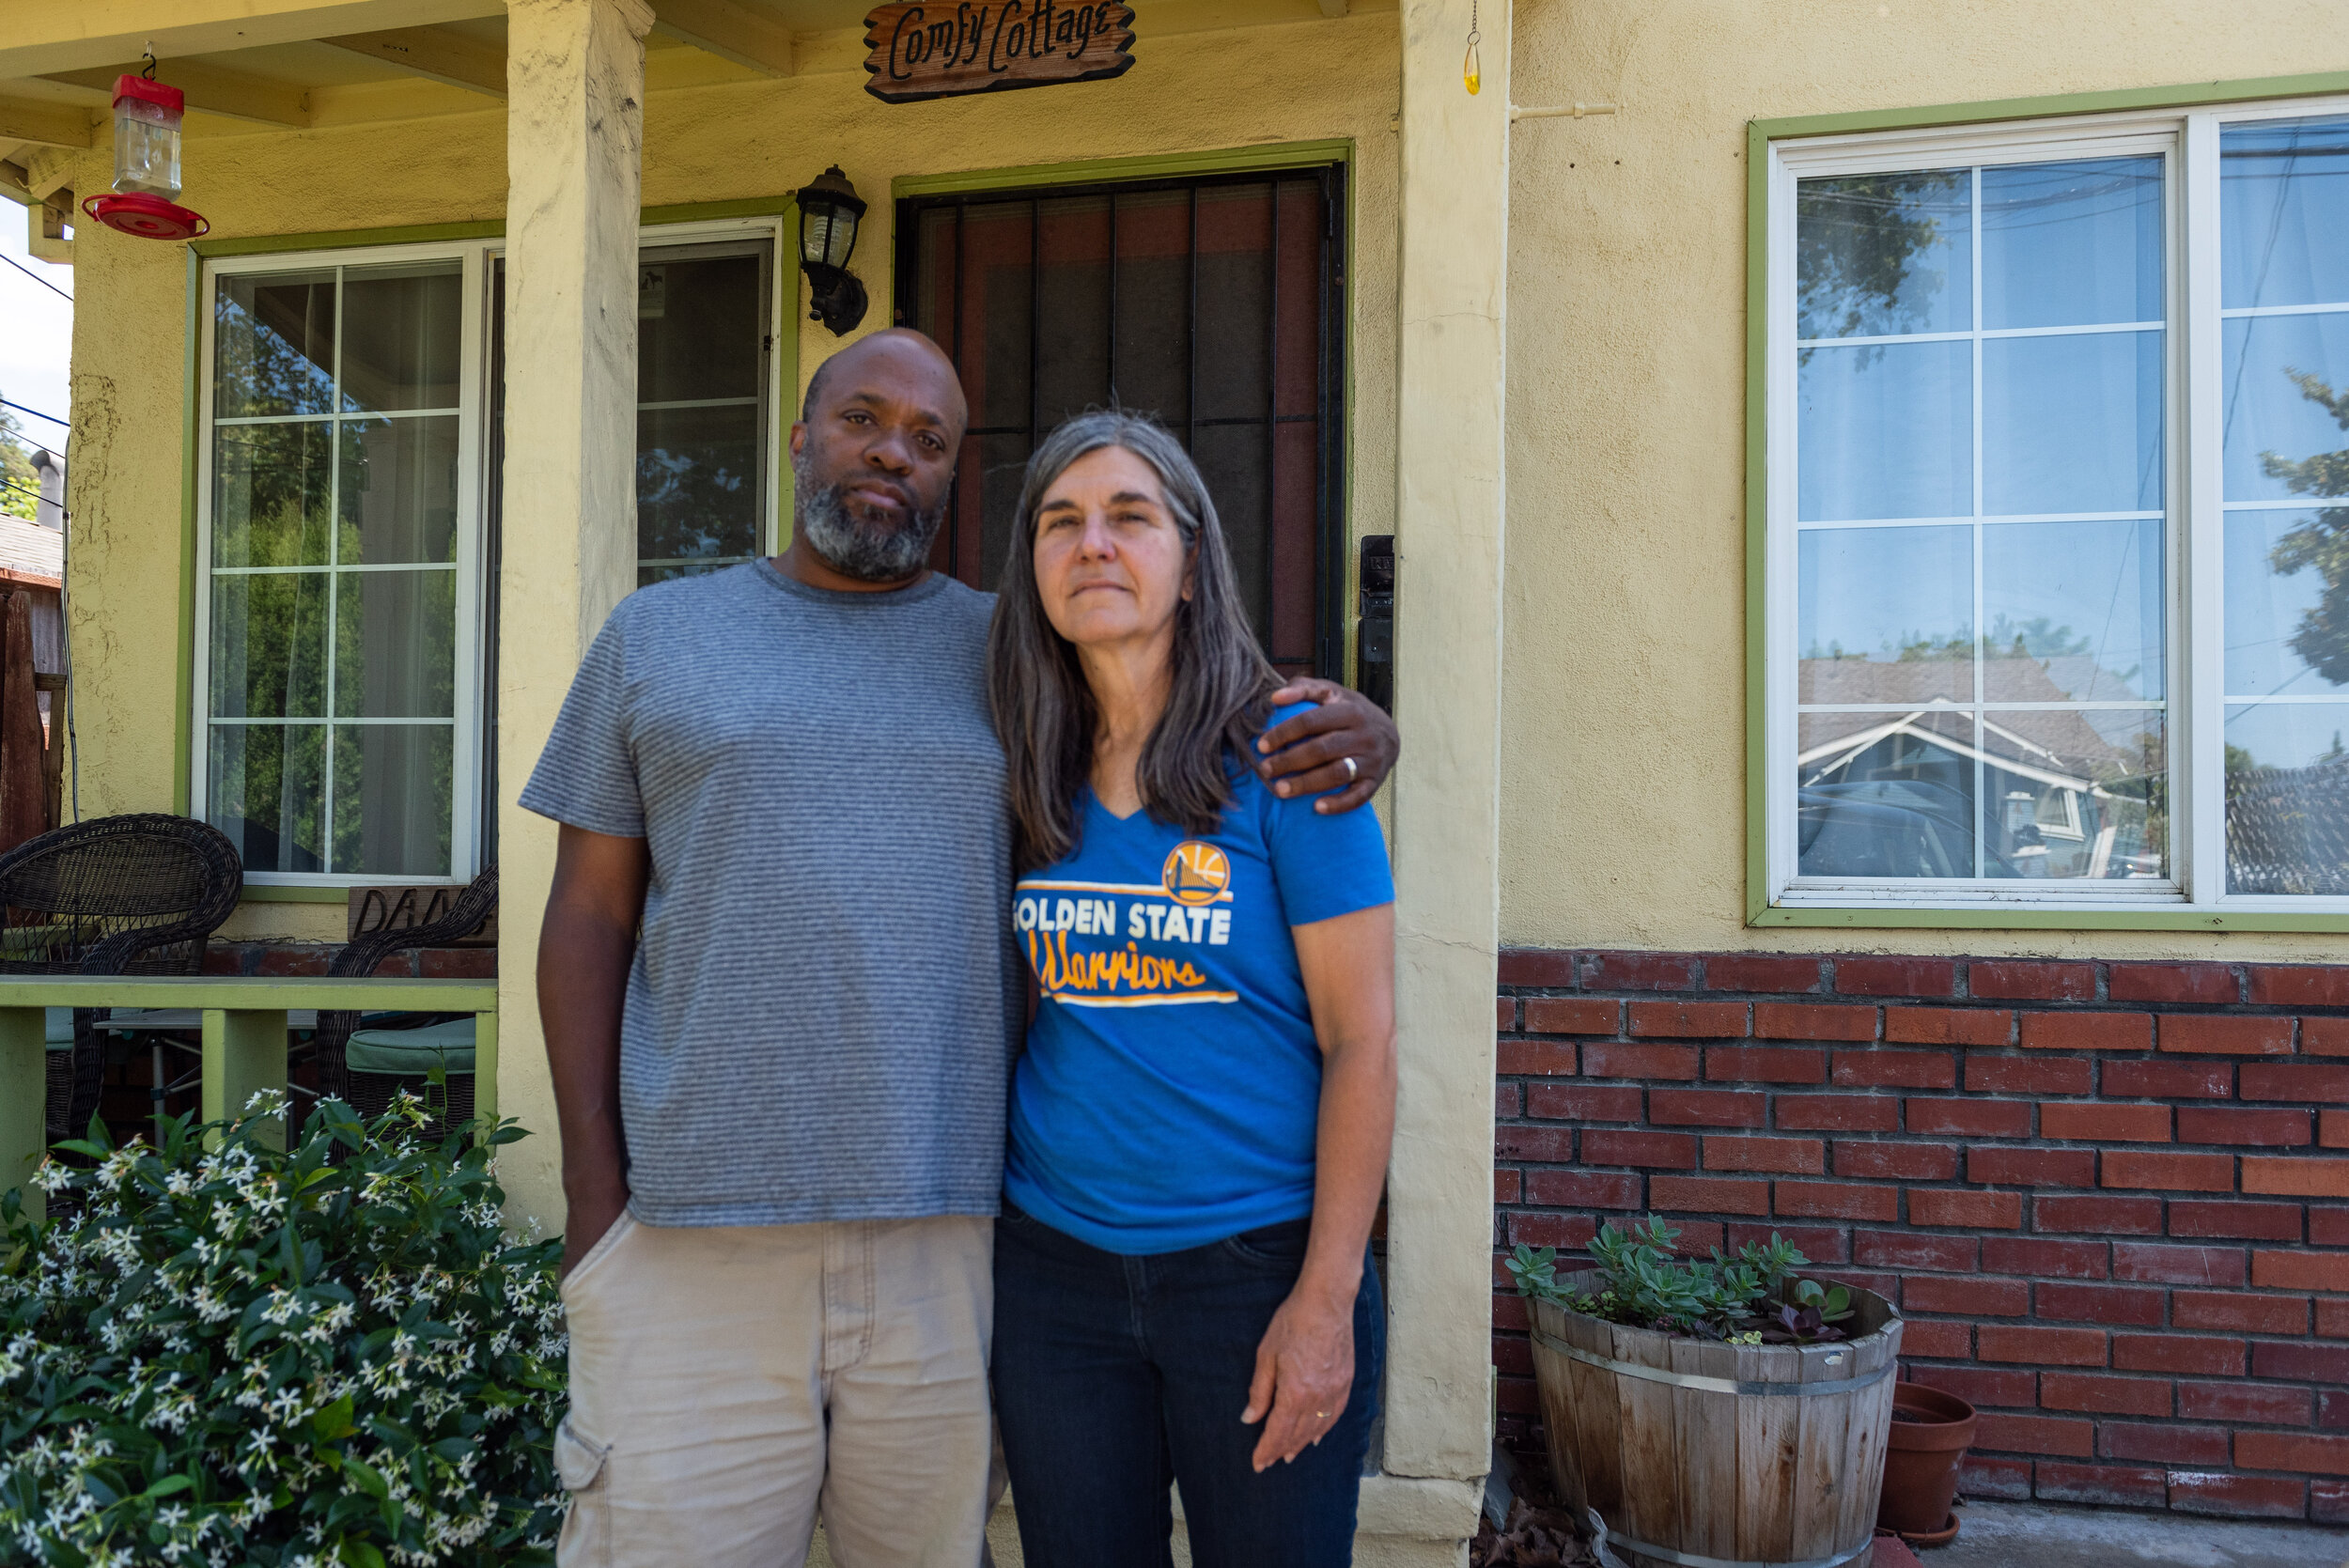  Mark and Robi McClure live not far from Maria and Gabriel Bravo. ”By 6pm, the day of the flood, the water was at our front door, there were cars floating on the street. Luckily, we had sand bags that prevented the water from coming into the house. B